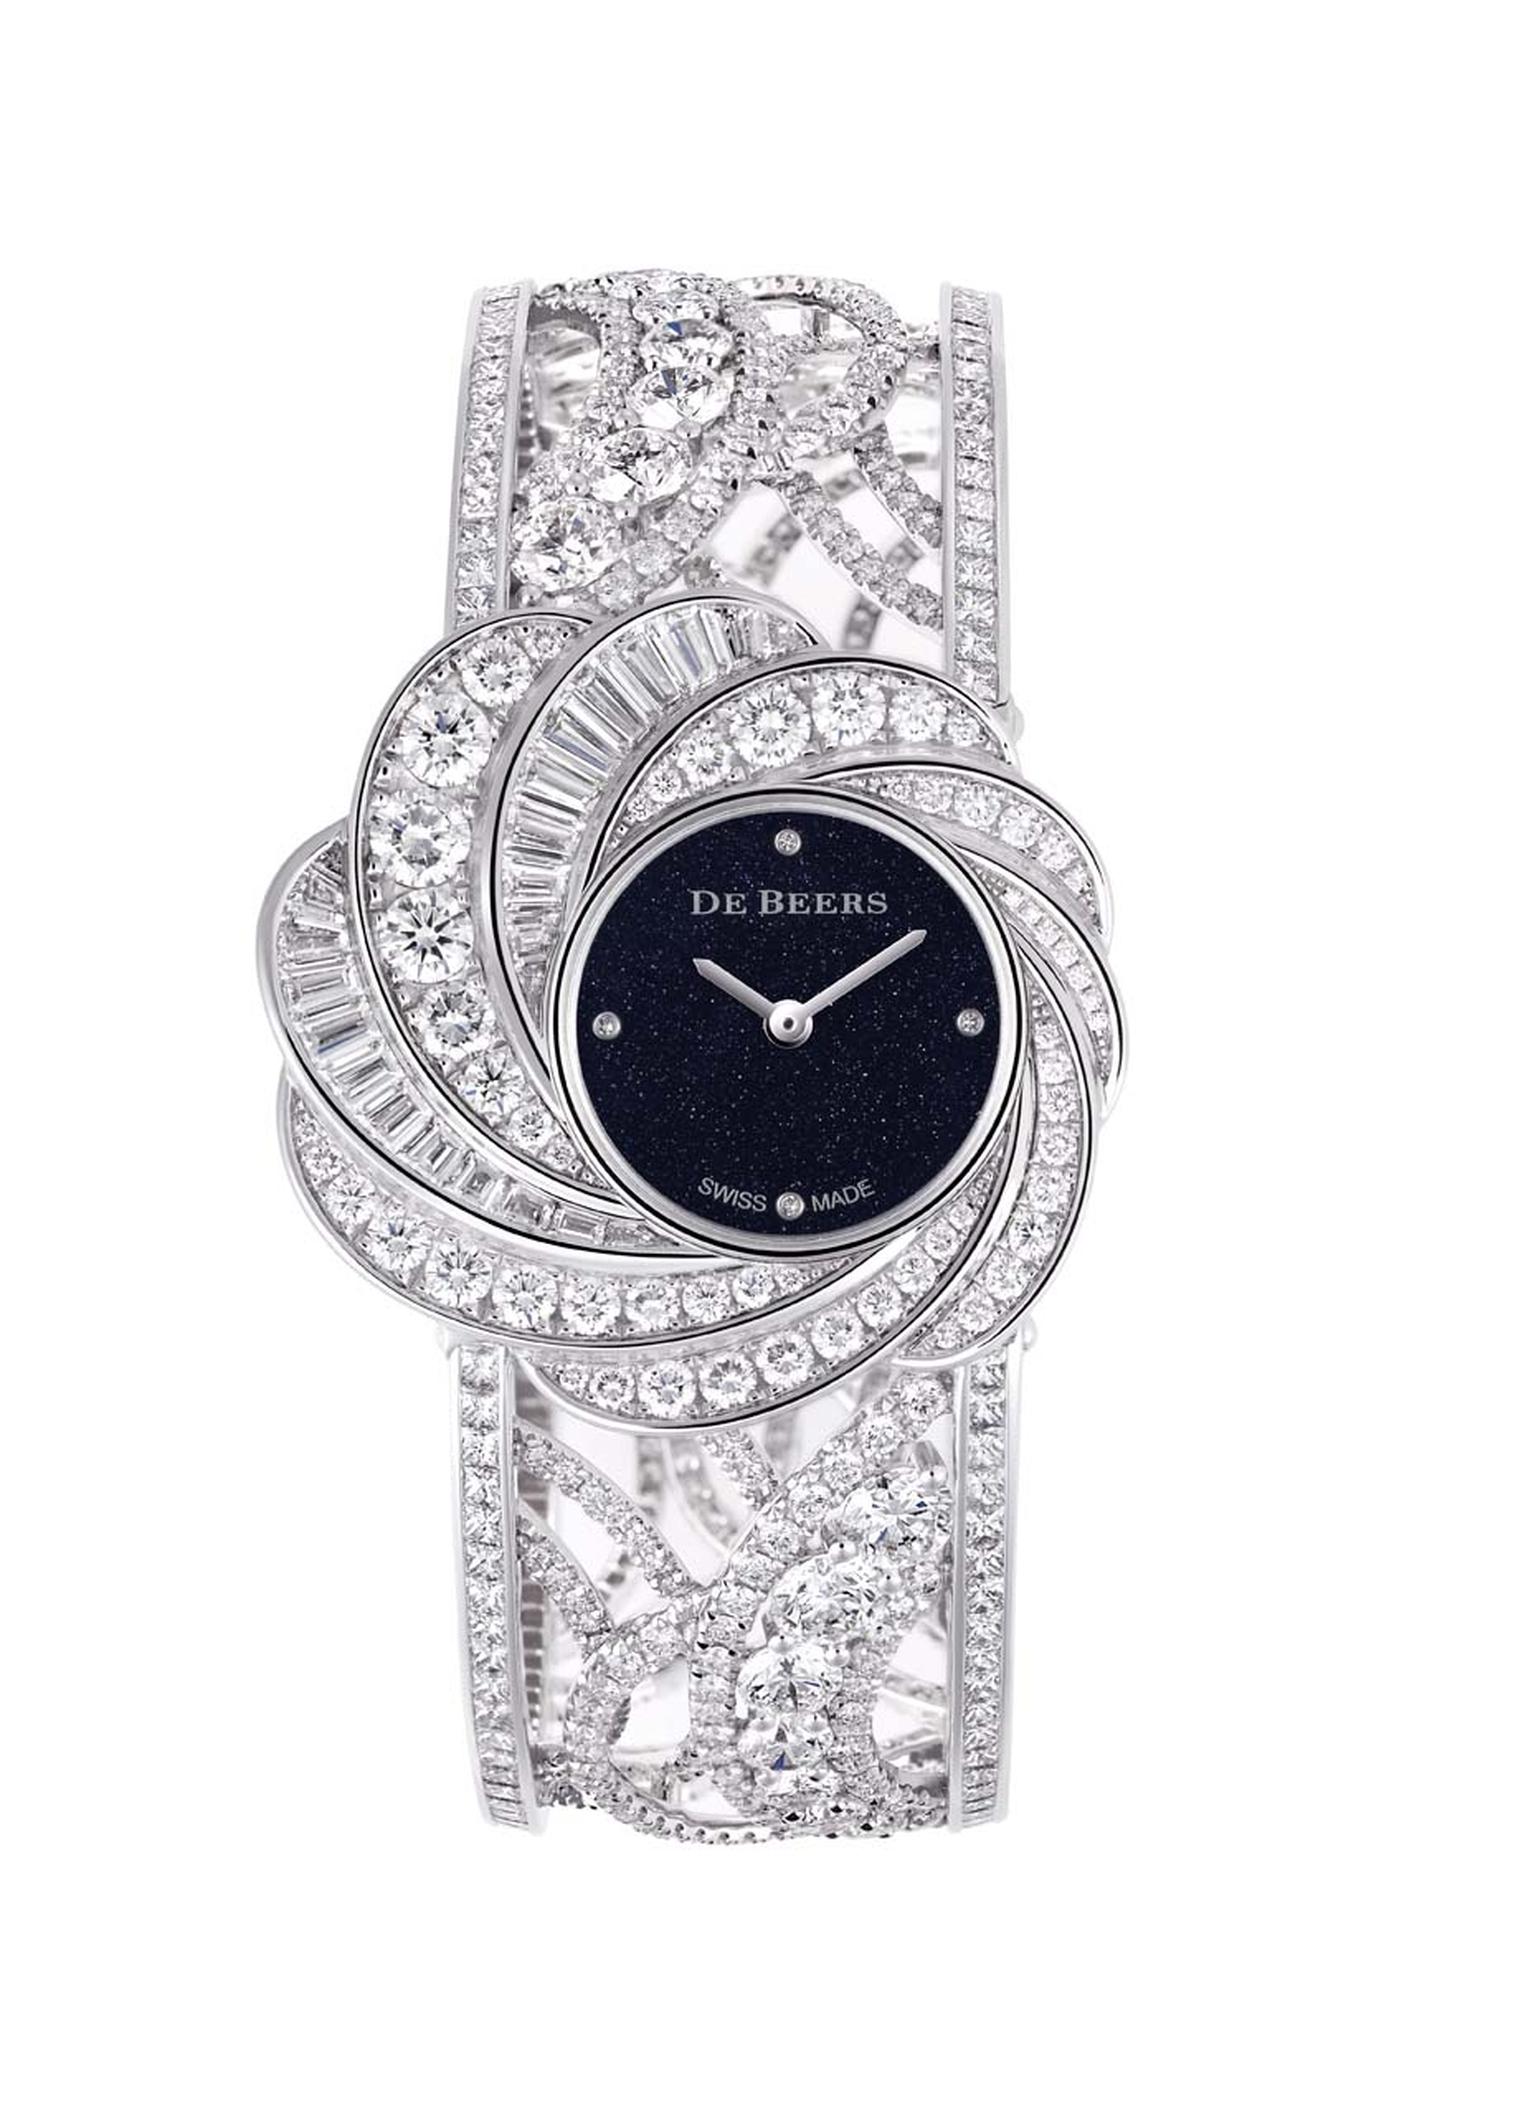 De Beers Aria High Jewellery Unique watch featuring an aventurine dial and pavé, brilliant and baguette-cut diamonds.